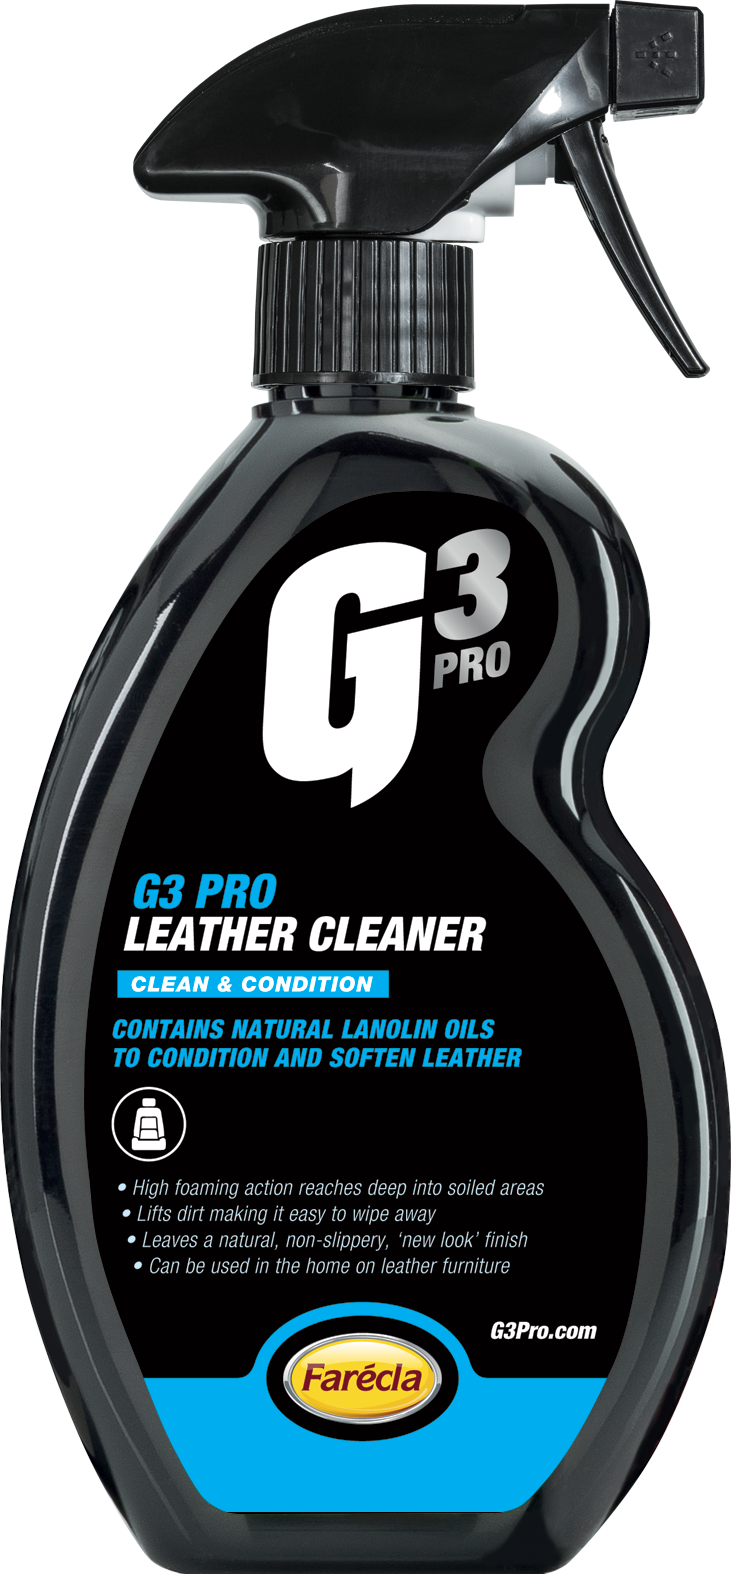 G3 Pro Leather Cleaner